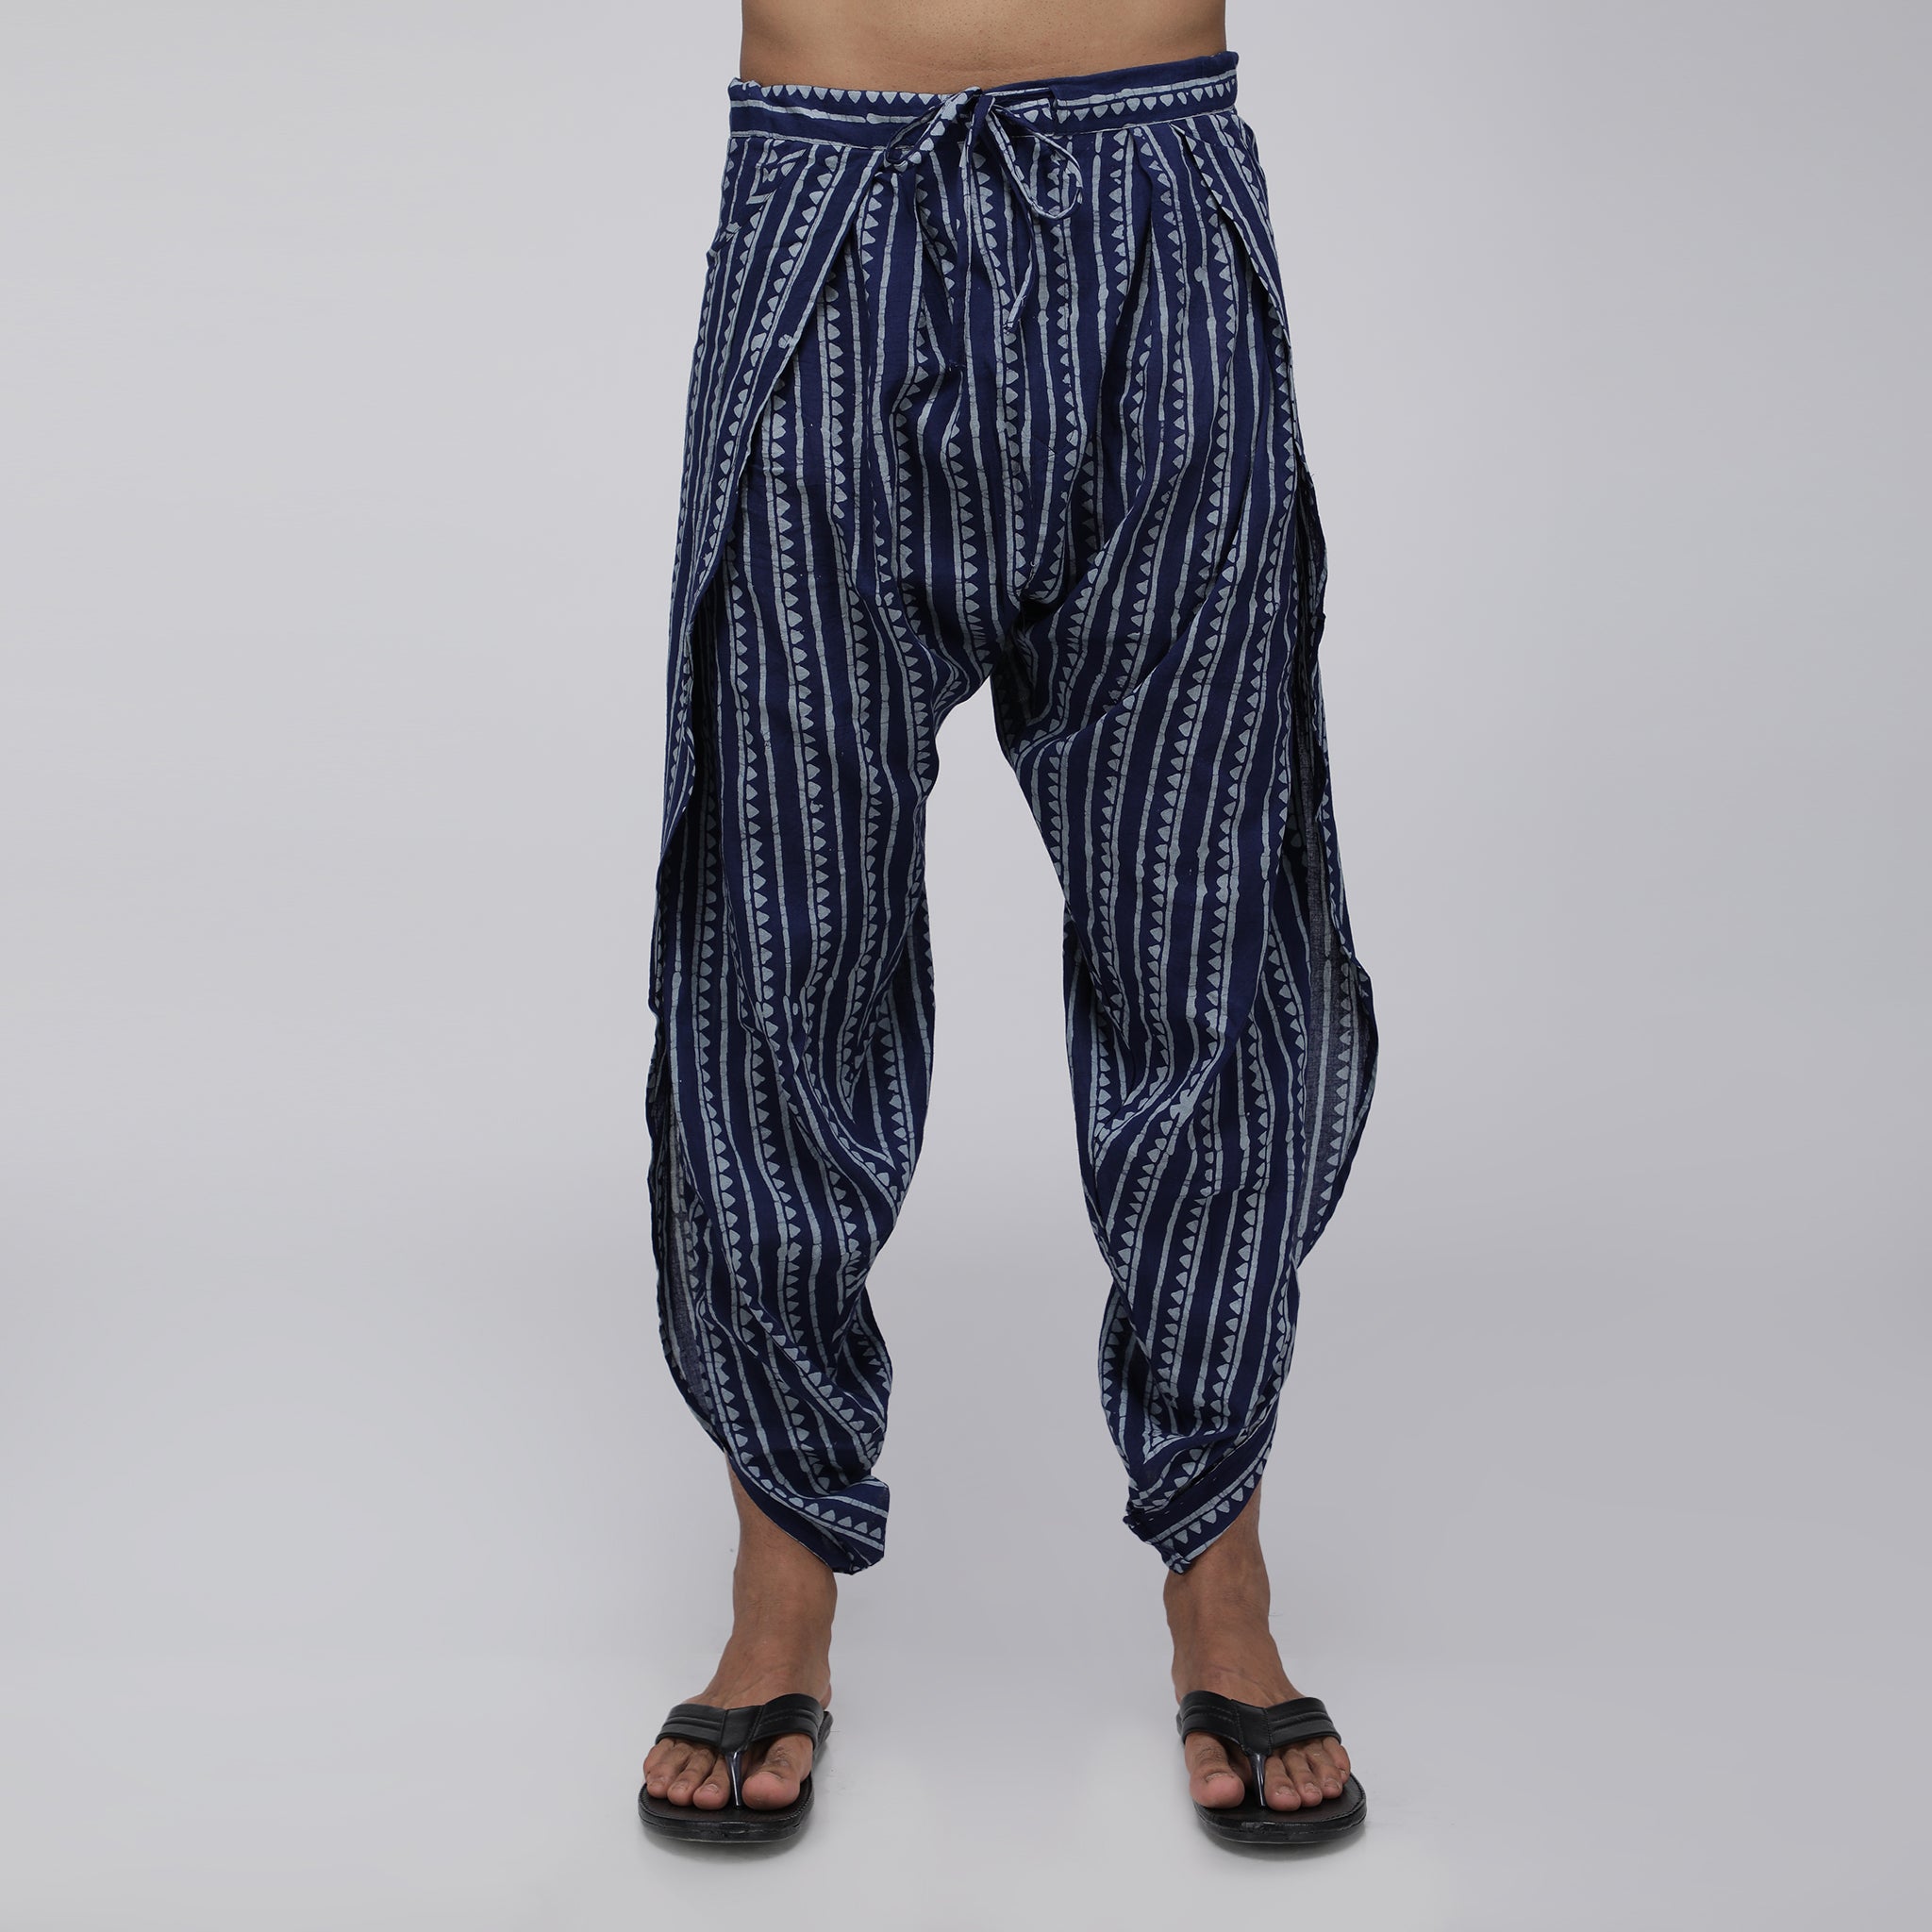 In-Sattva Men's Traditional Indian Style Pure Cotton Solid Churidaar Pants  - Walmart.com